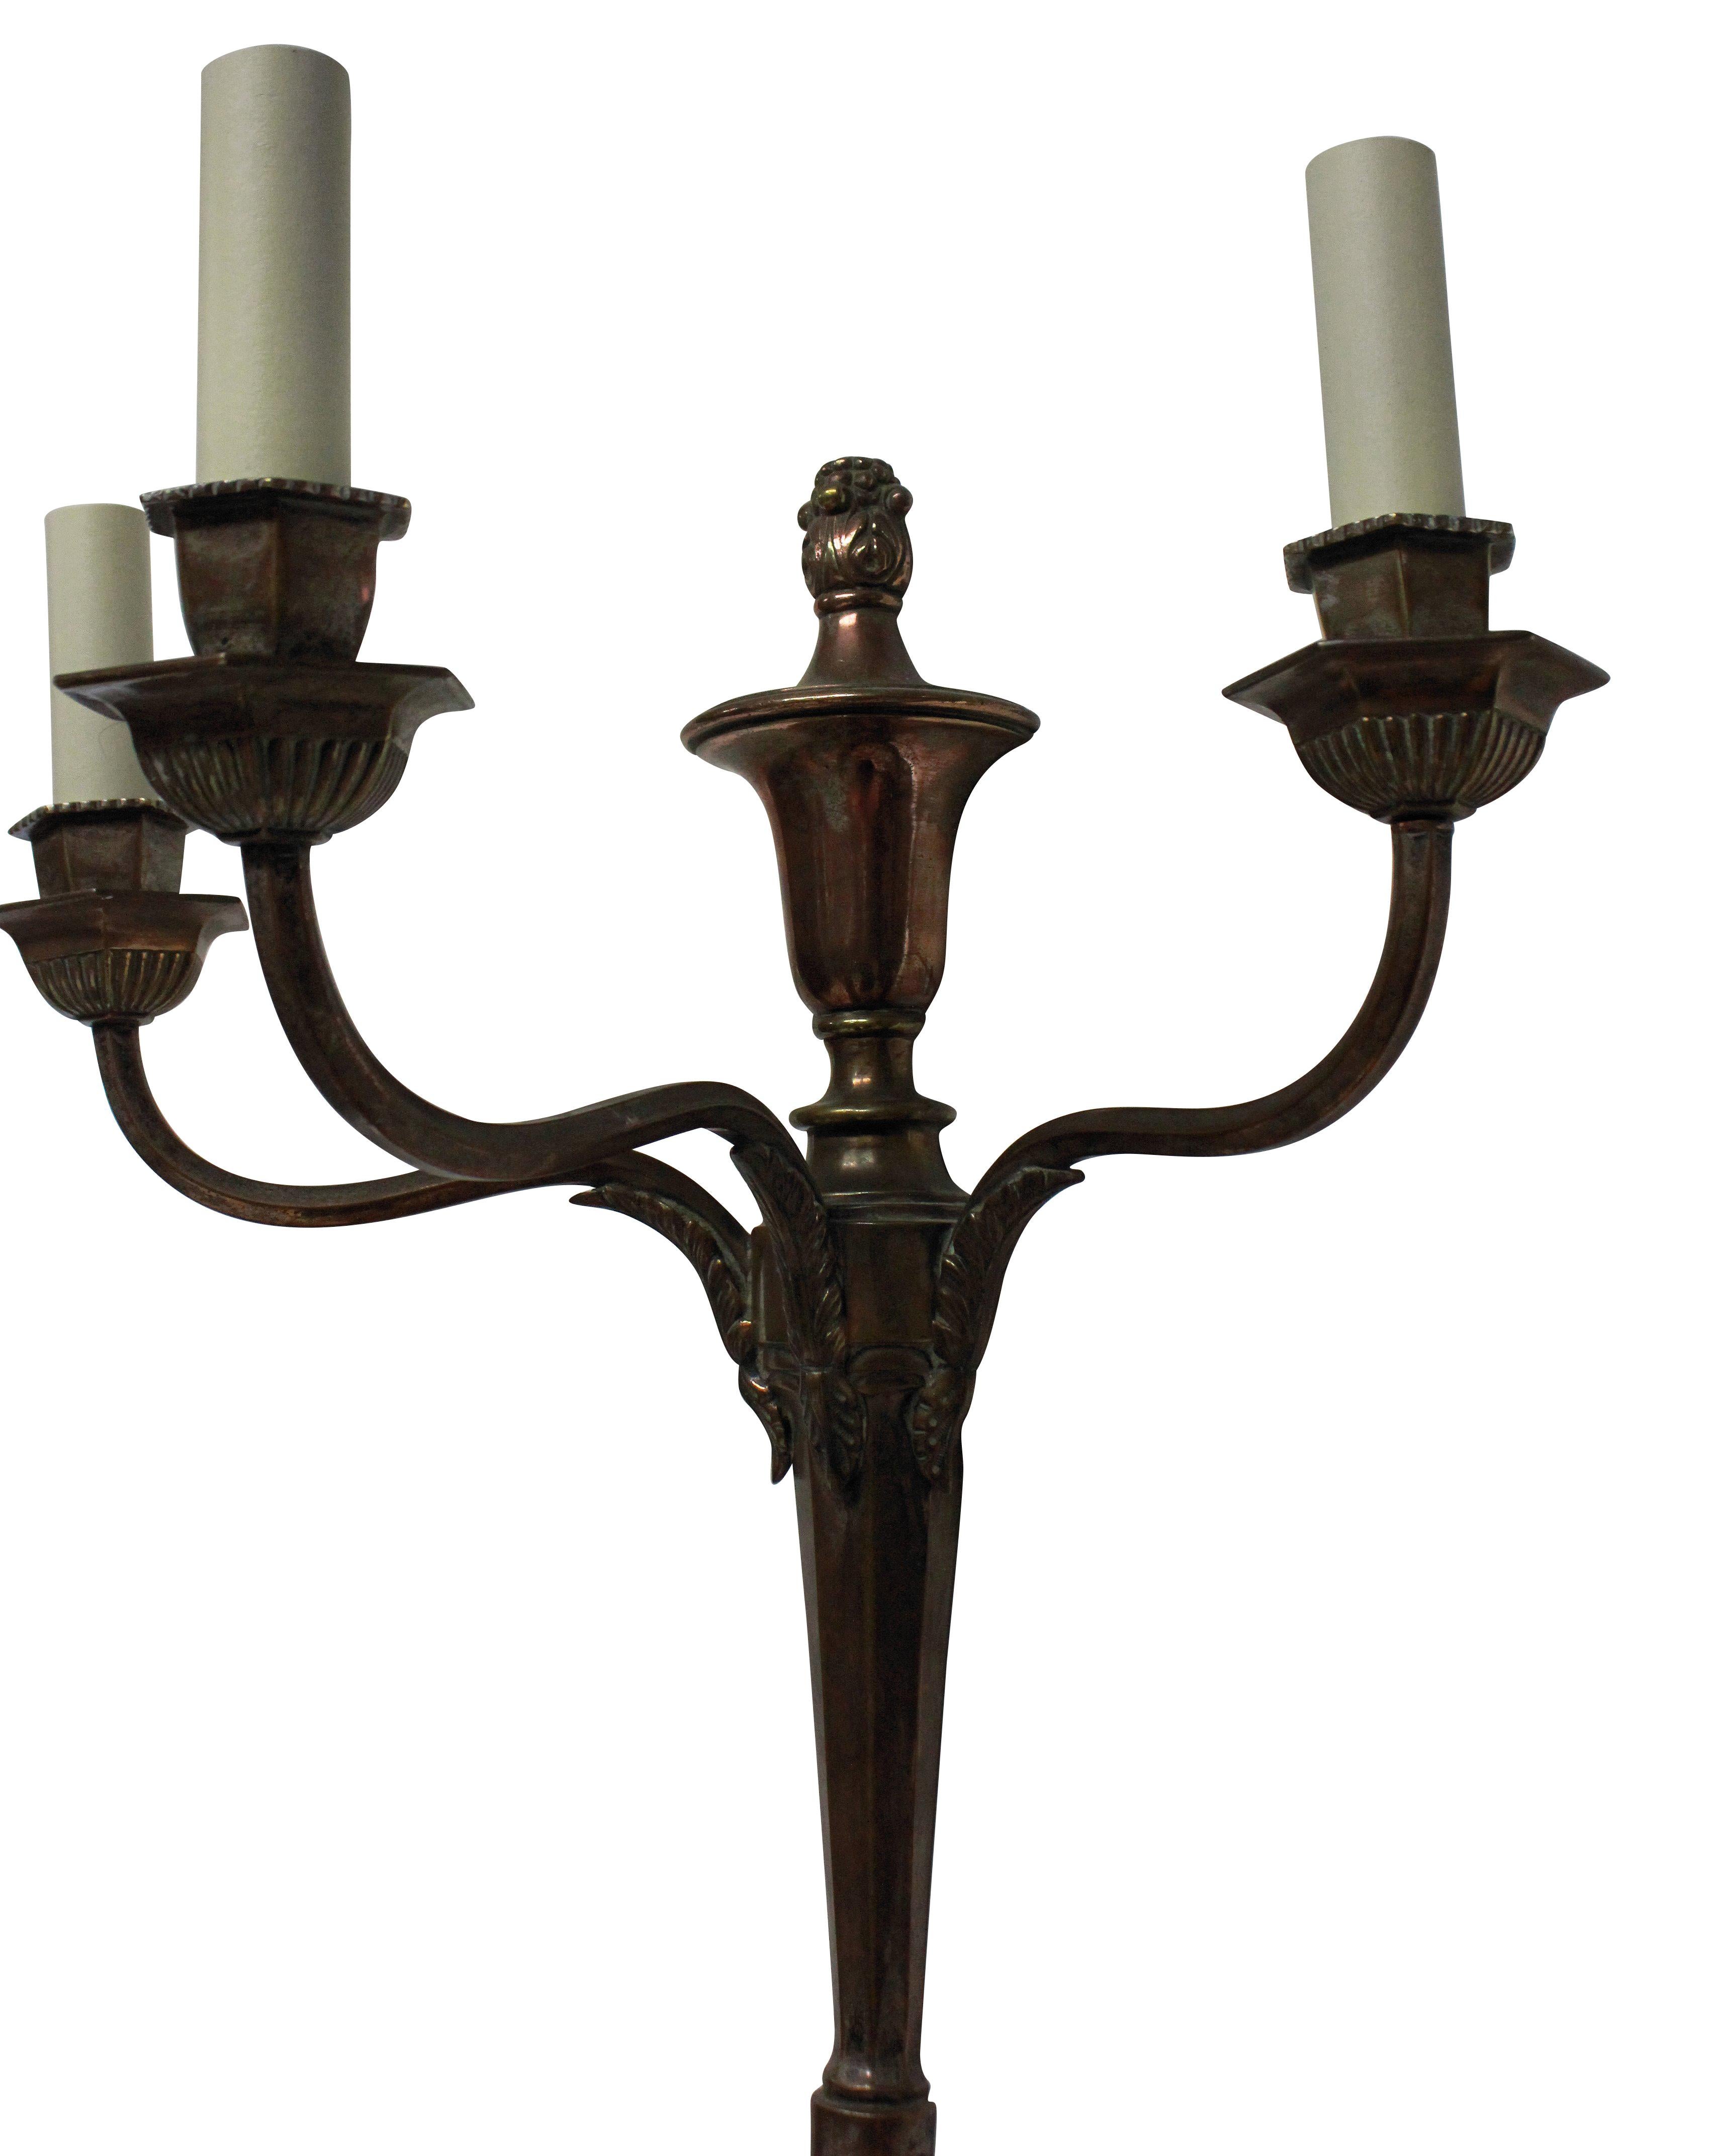 A set of four English neoclassical three-branch wall sconces in an un-restored bronzed finish.